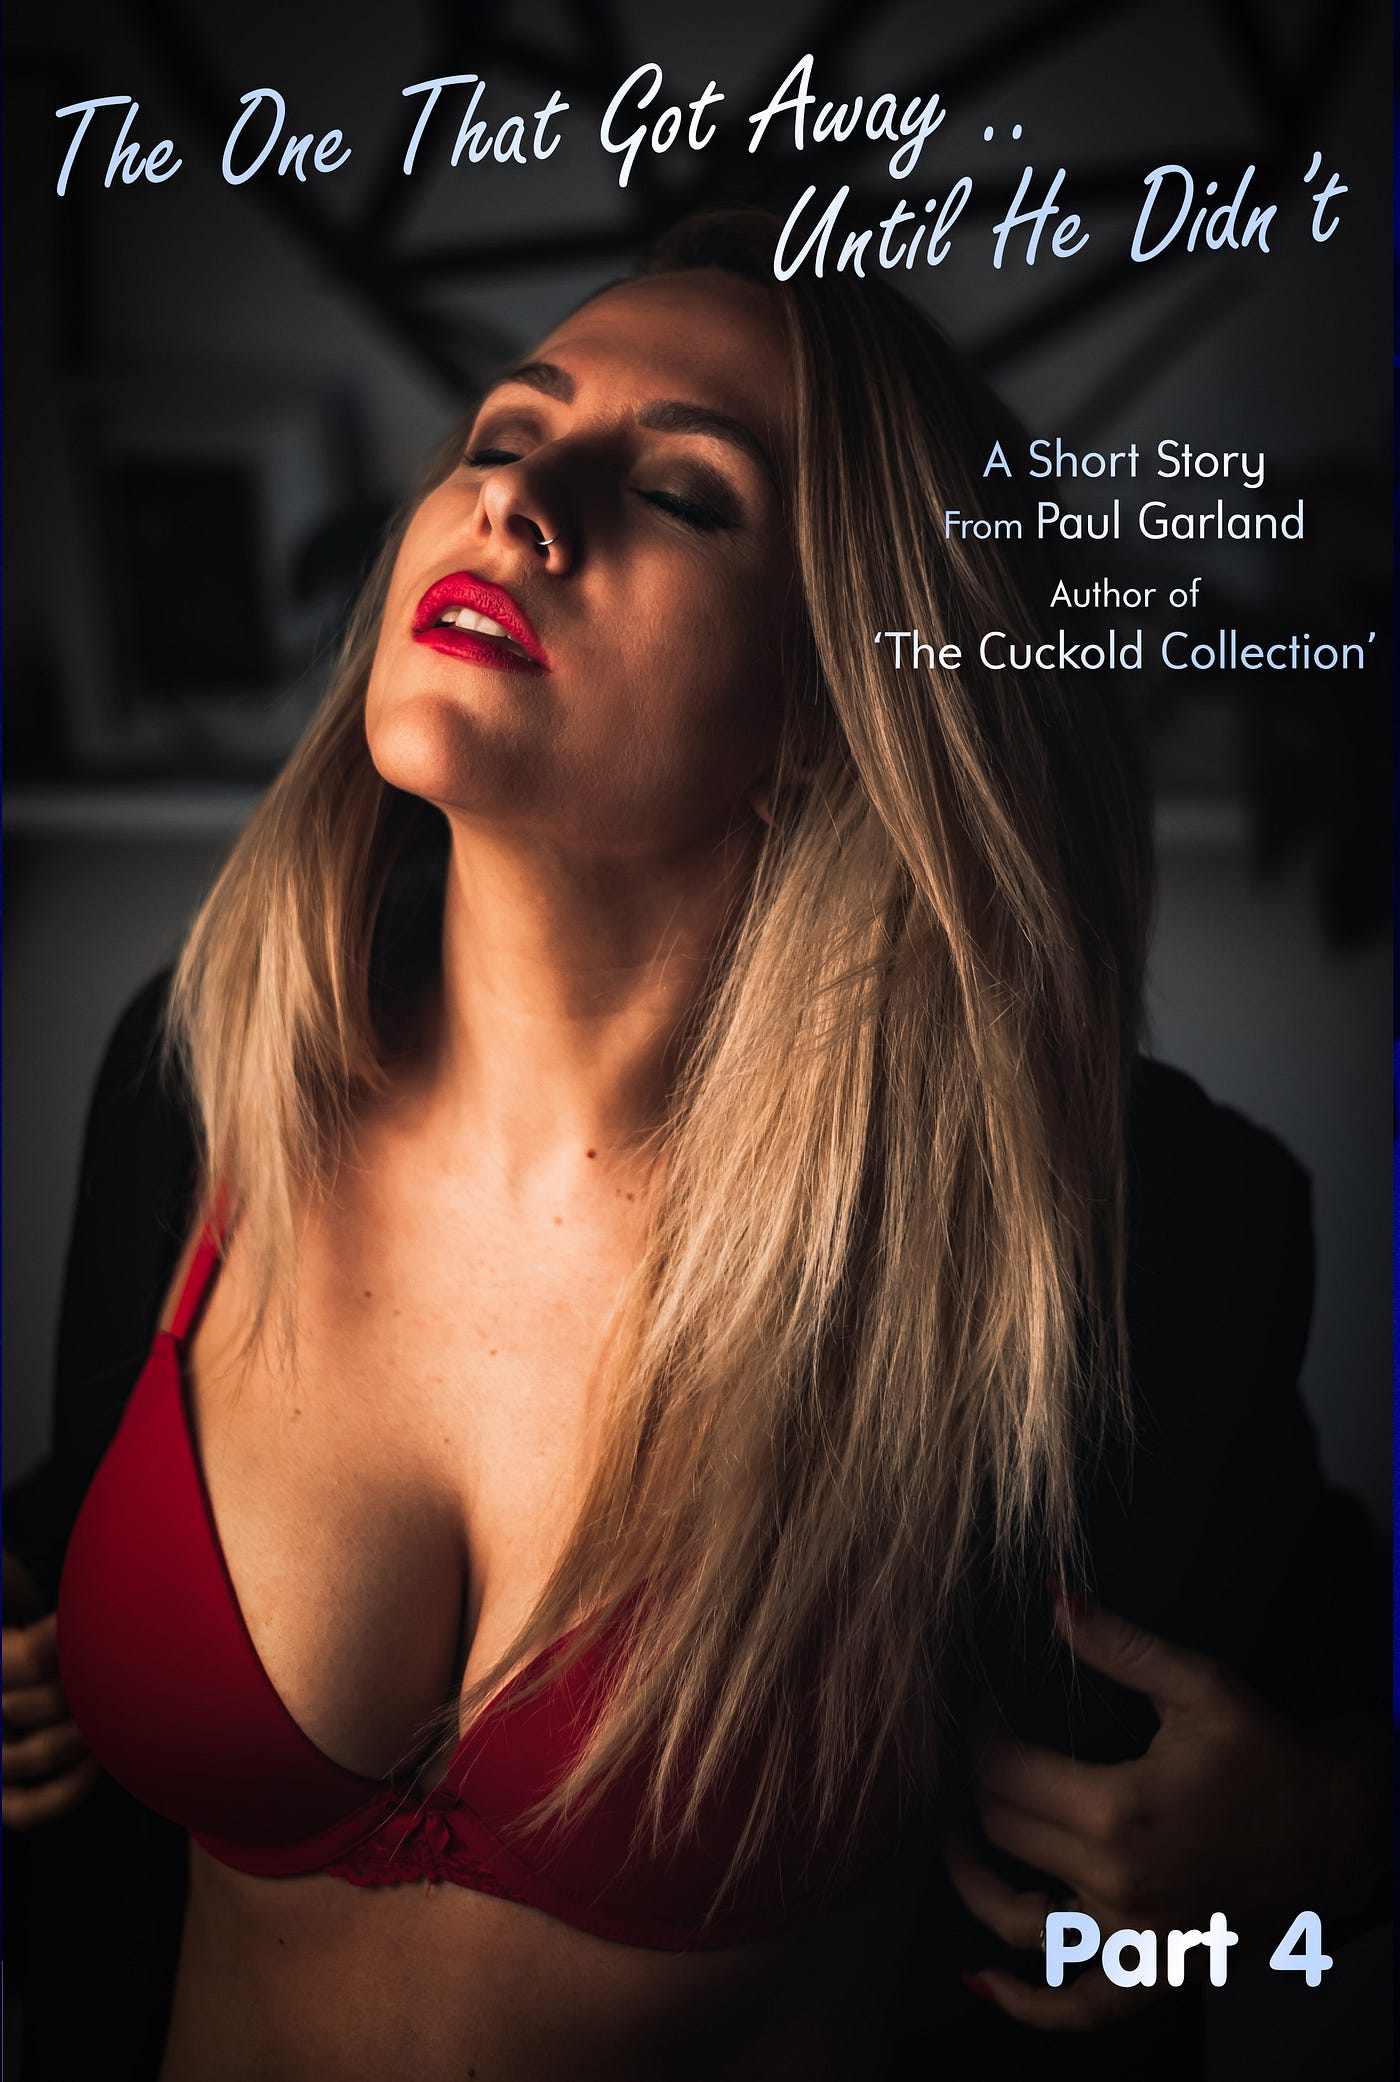 The One That Got Away… Until He Didnt Part 4 by Paul Garland ACHE (Authors of Cuckold and Hotwife Erotica) Medium